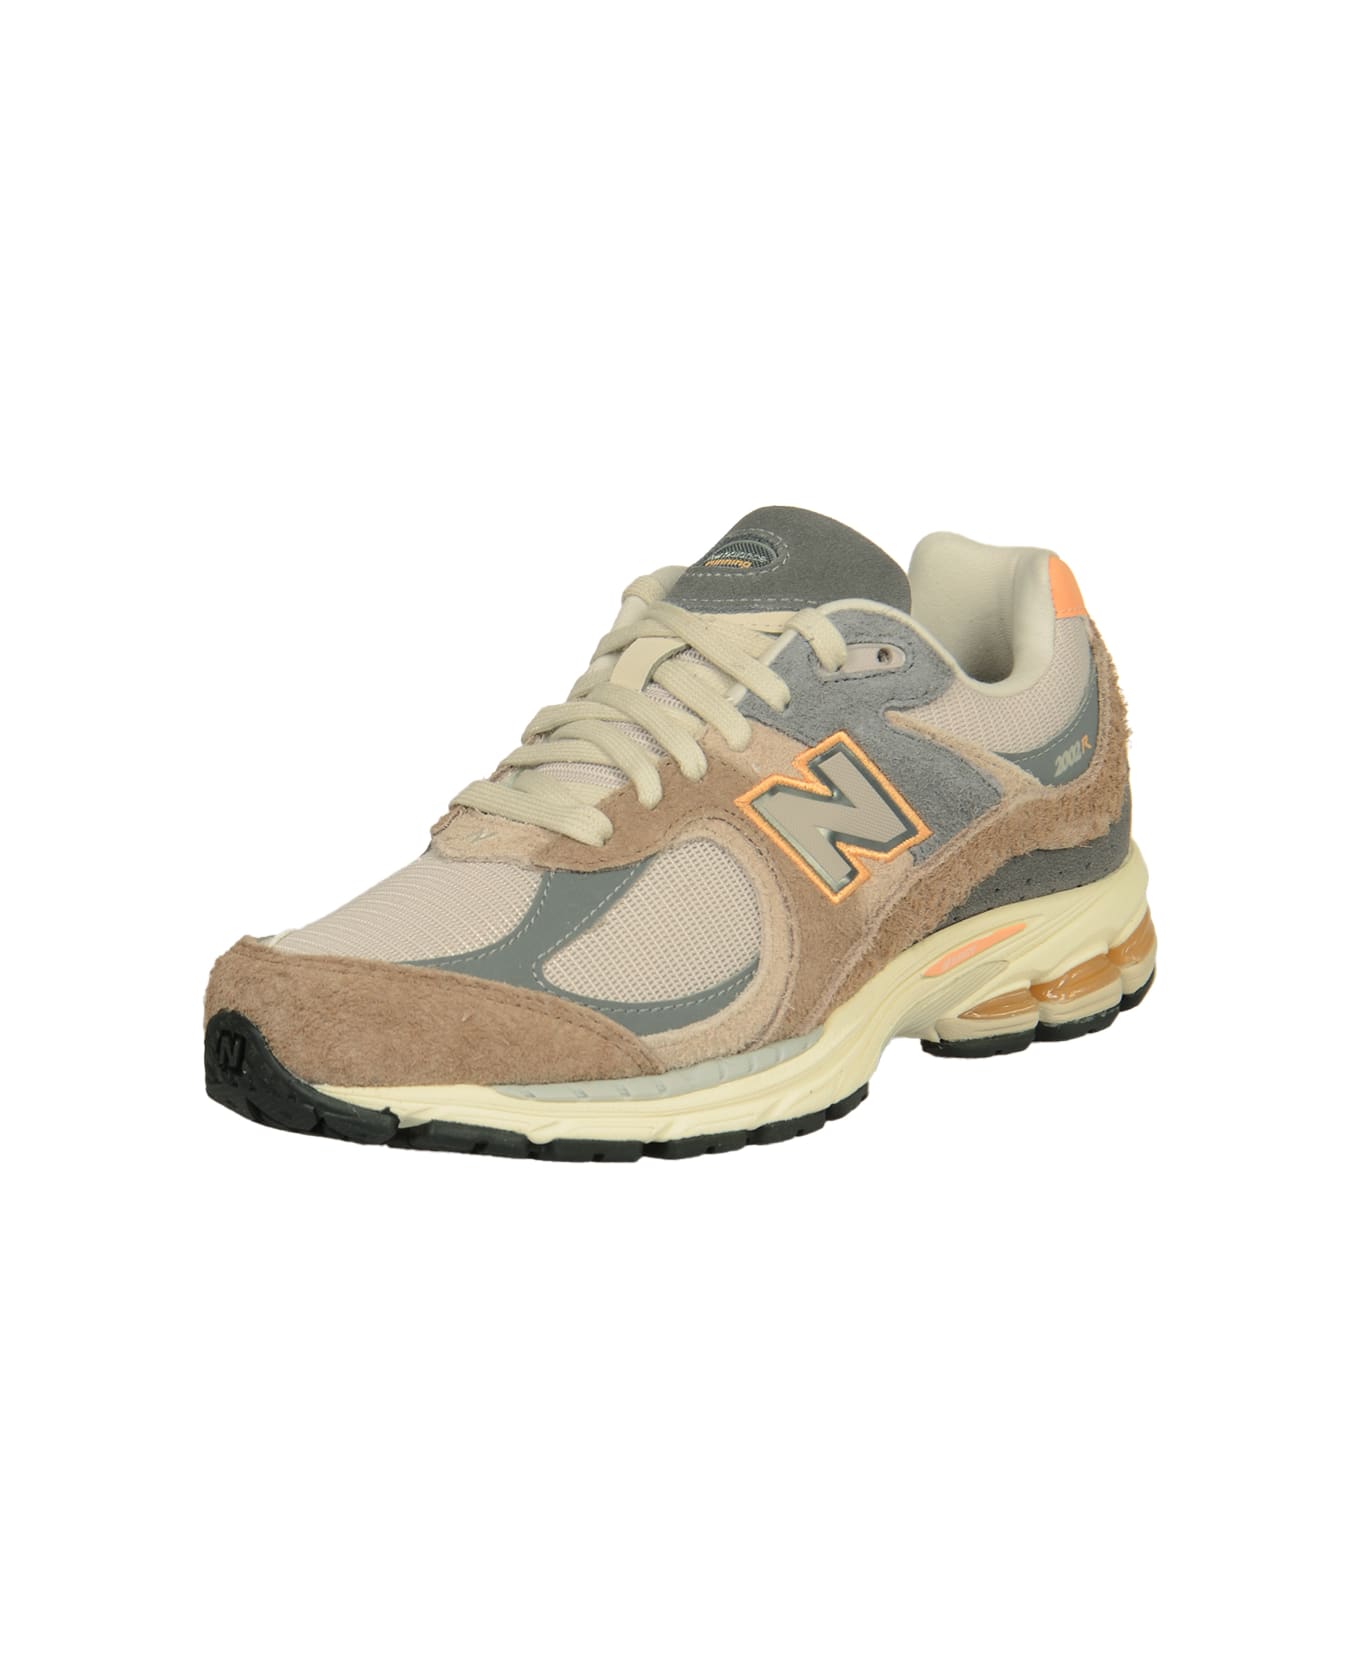 New Balance Logo Patched Sneakers - MULTICOLOR スニーカー